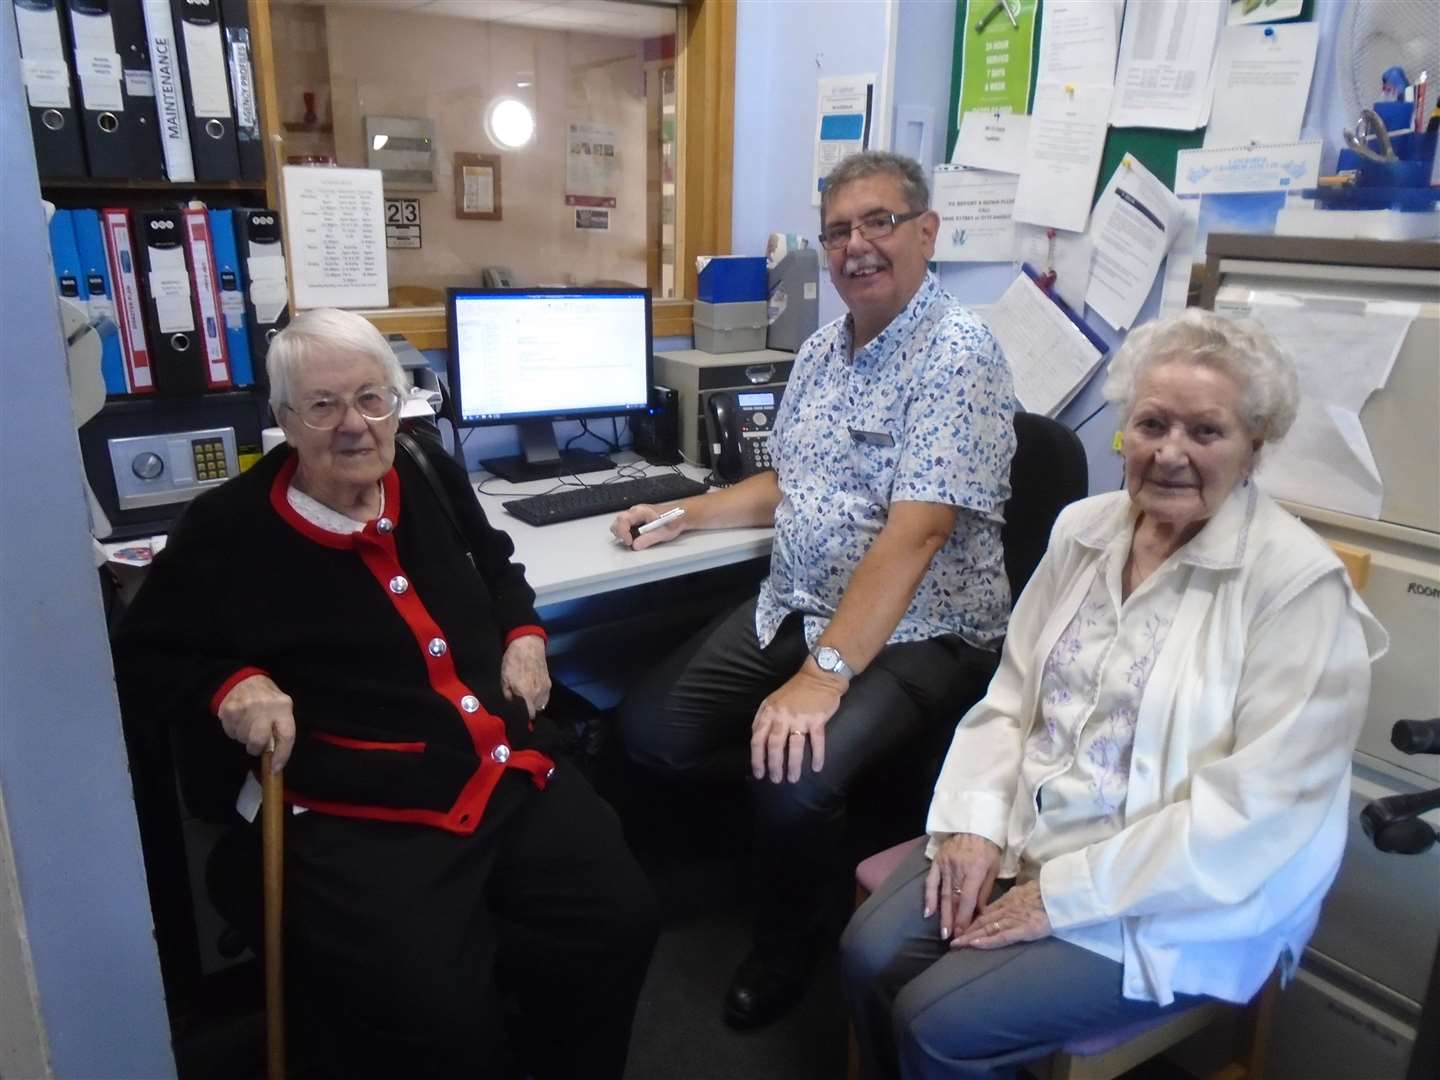 Care home manager Nigel Odd, with residents Cate (left) and Jean, reviewing the deluge of emails sent to Gardenia House. (14162936)